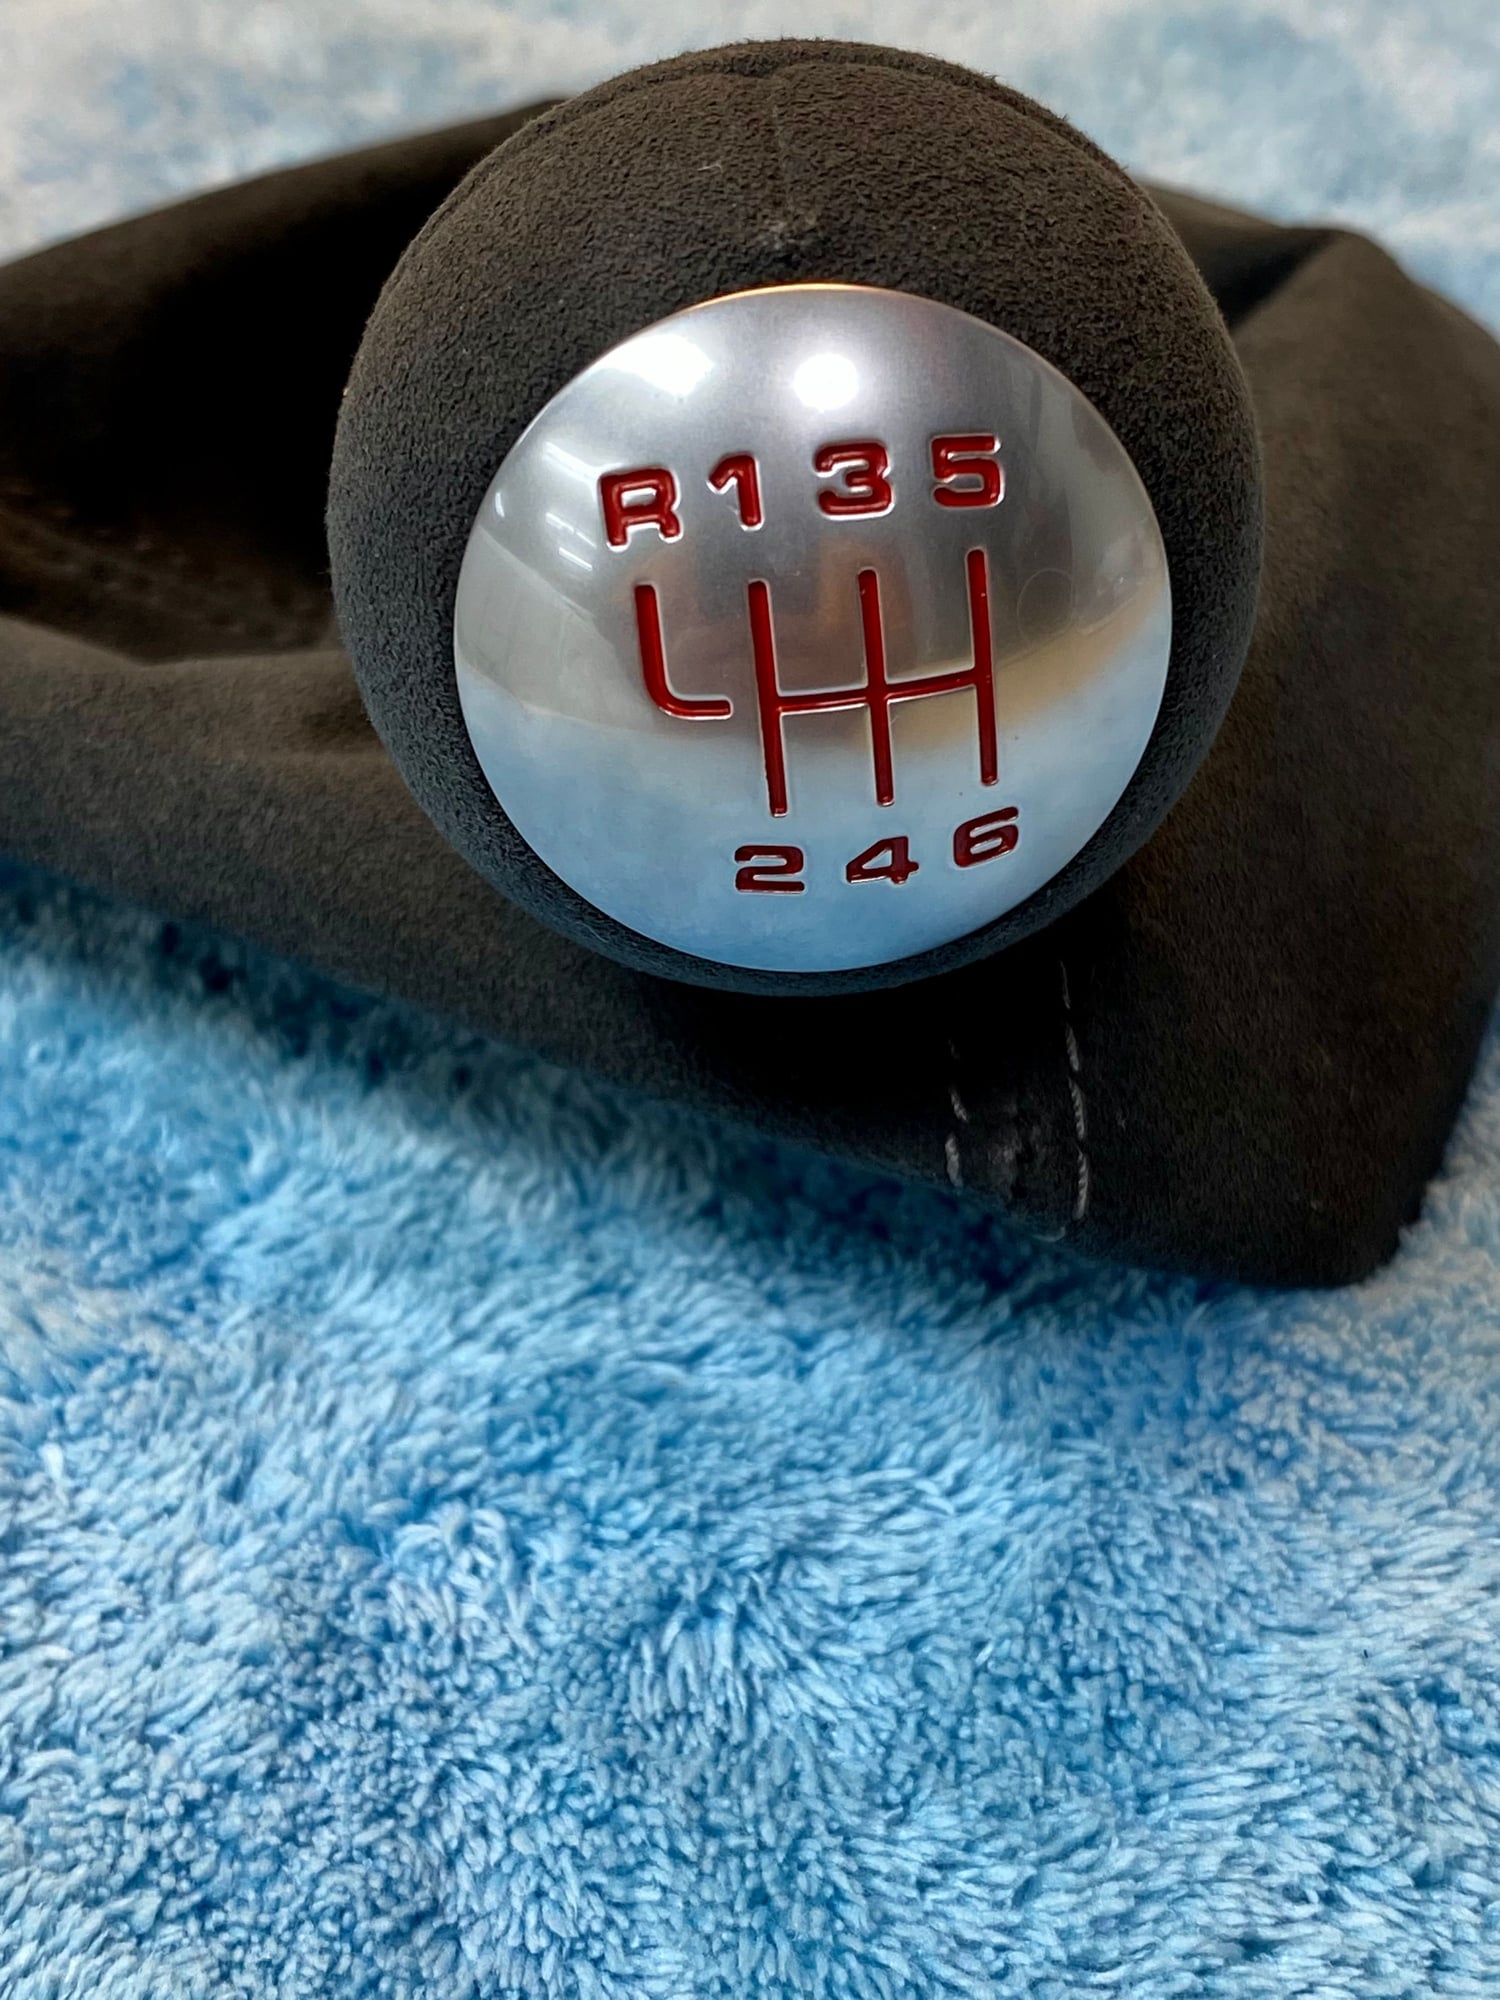 Interior/Upholstery - Rare 997 GT3 Alcantara Gearshift Knob and Boot. Excellent. - Used - 2016 to 0 Porsche 718 Spyder - Shreveport, LA 71106, United States